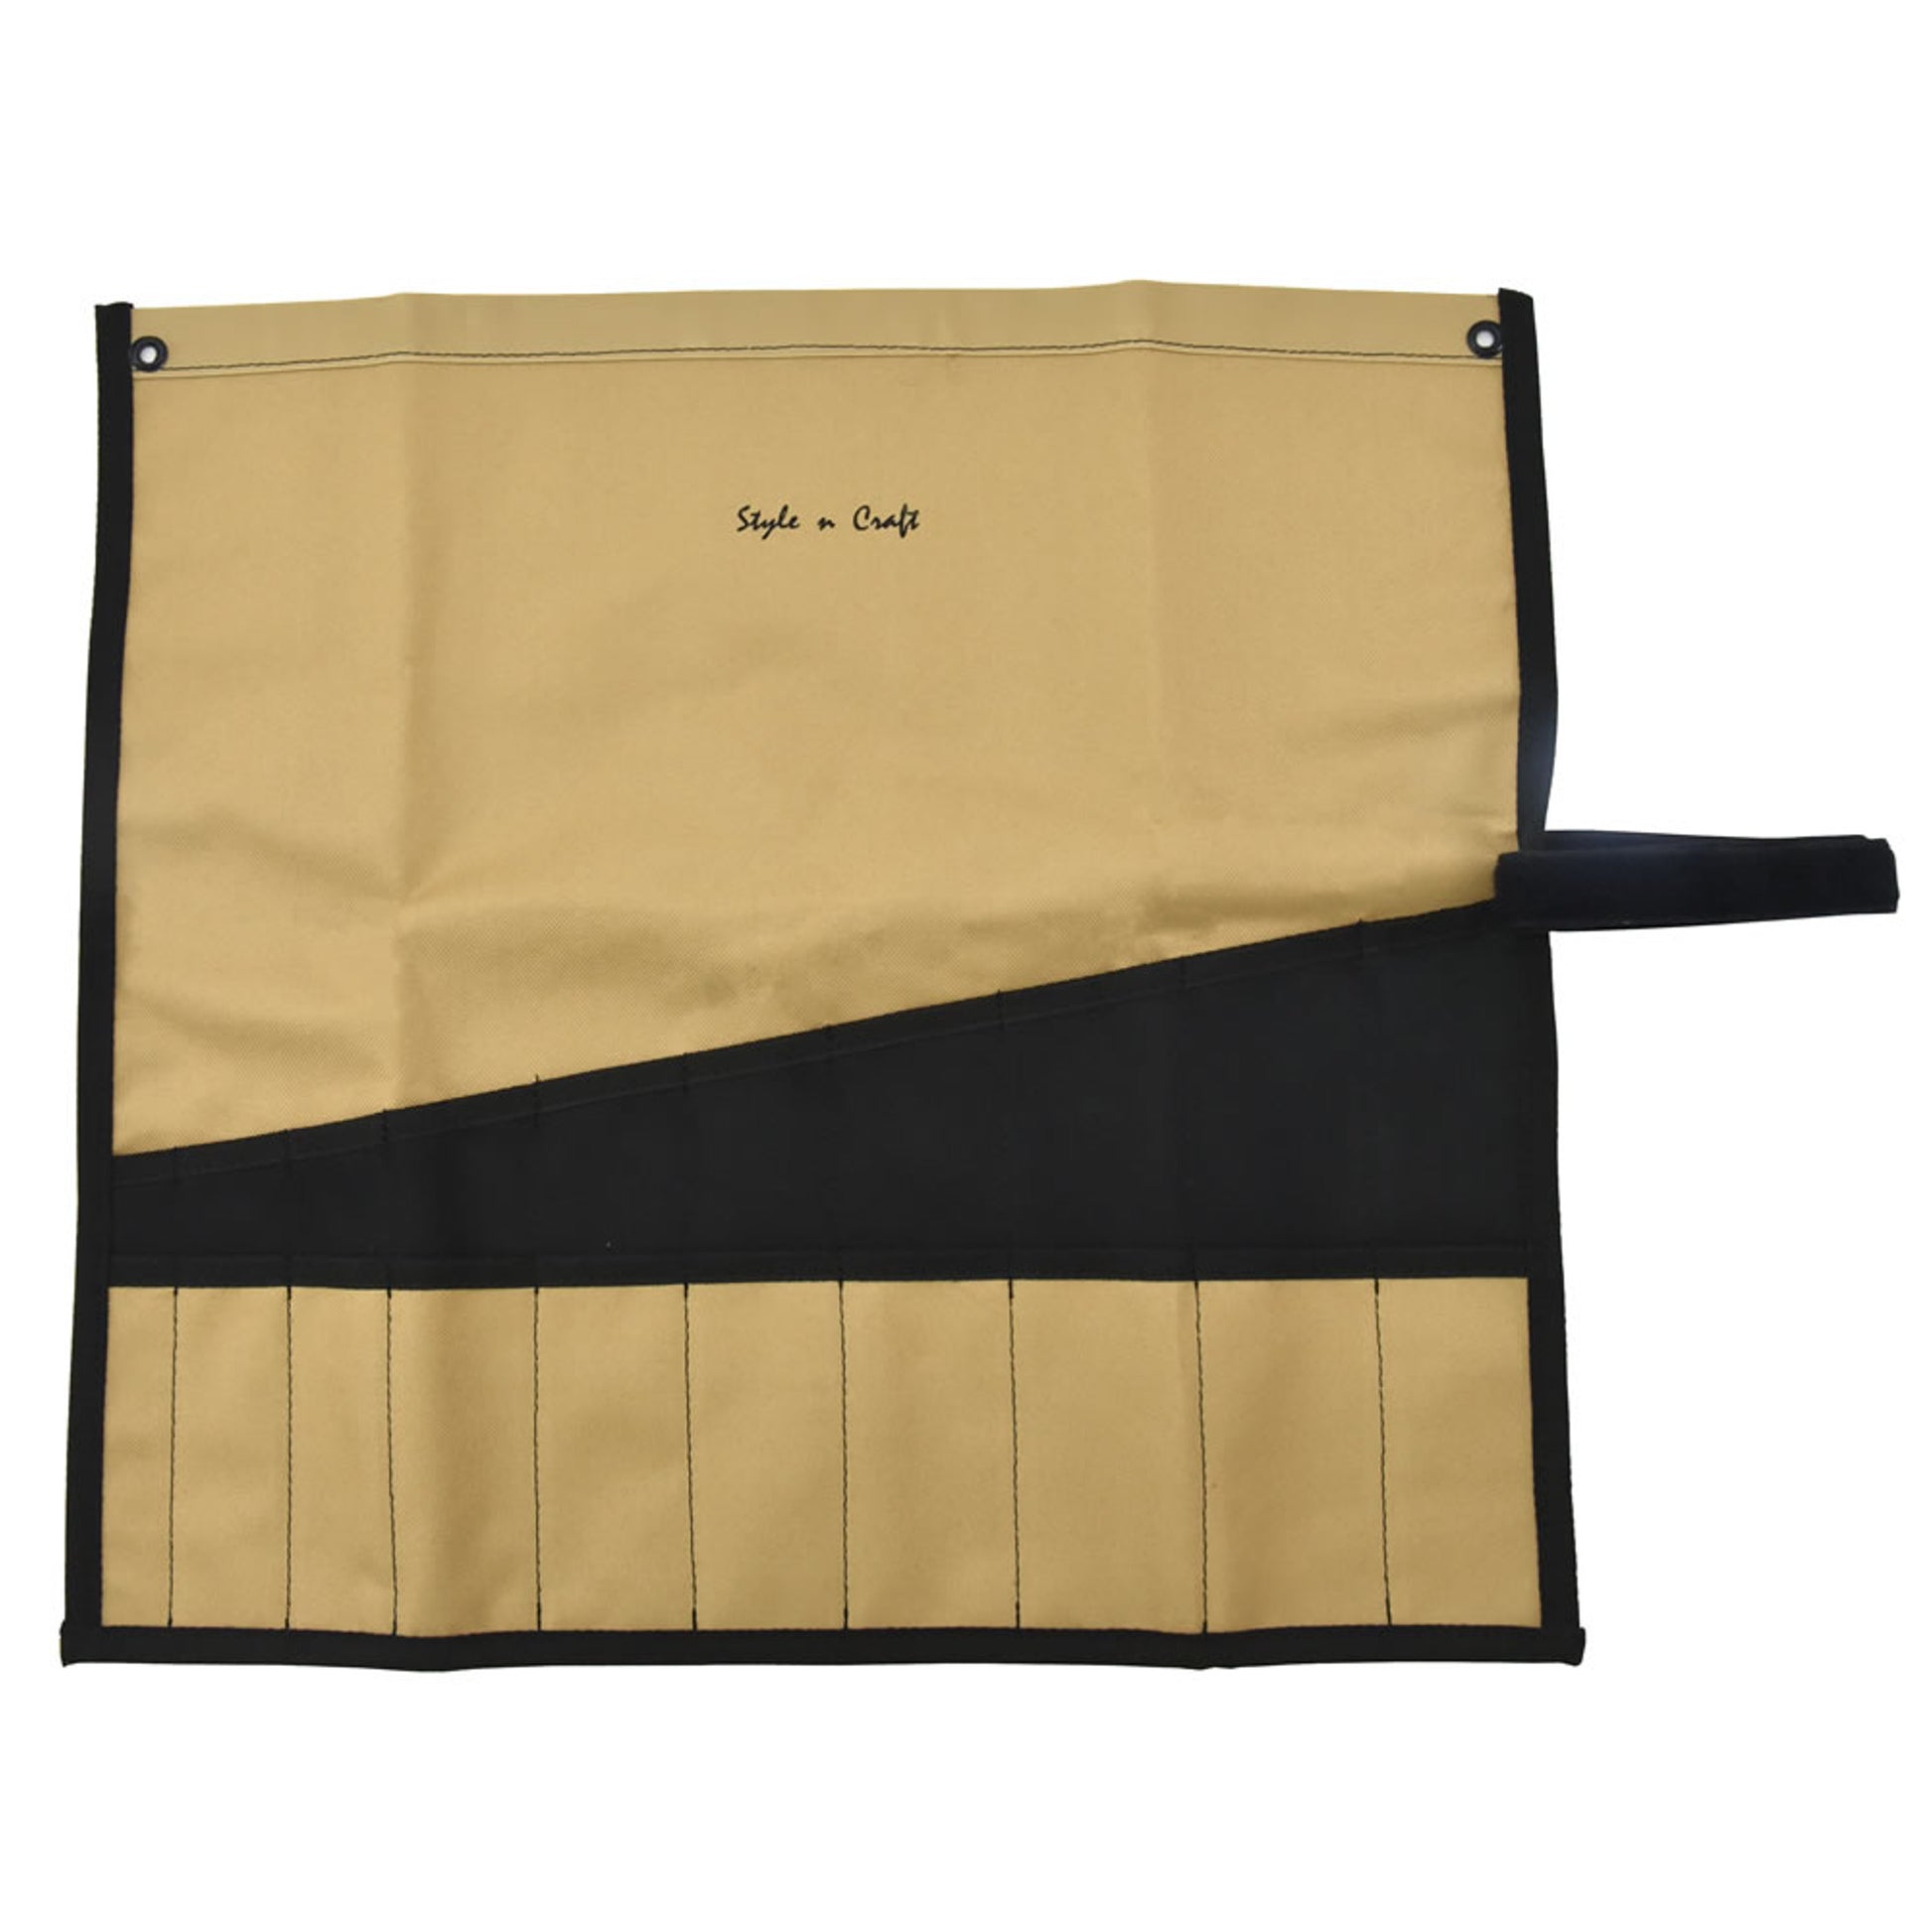 Style n Craft - 76508 20 Pocket Chisel and Tool Roll Pouch in Polyester